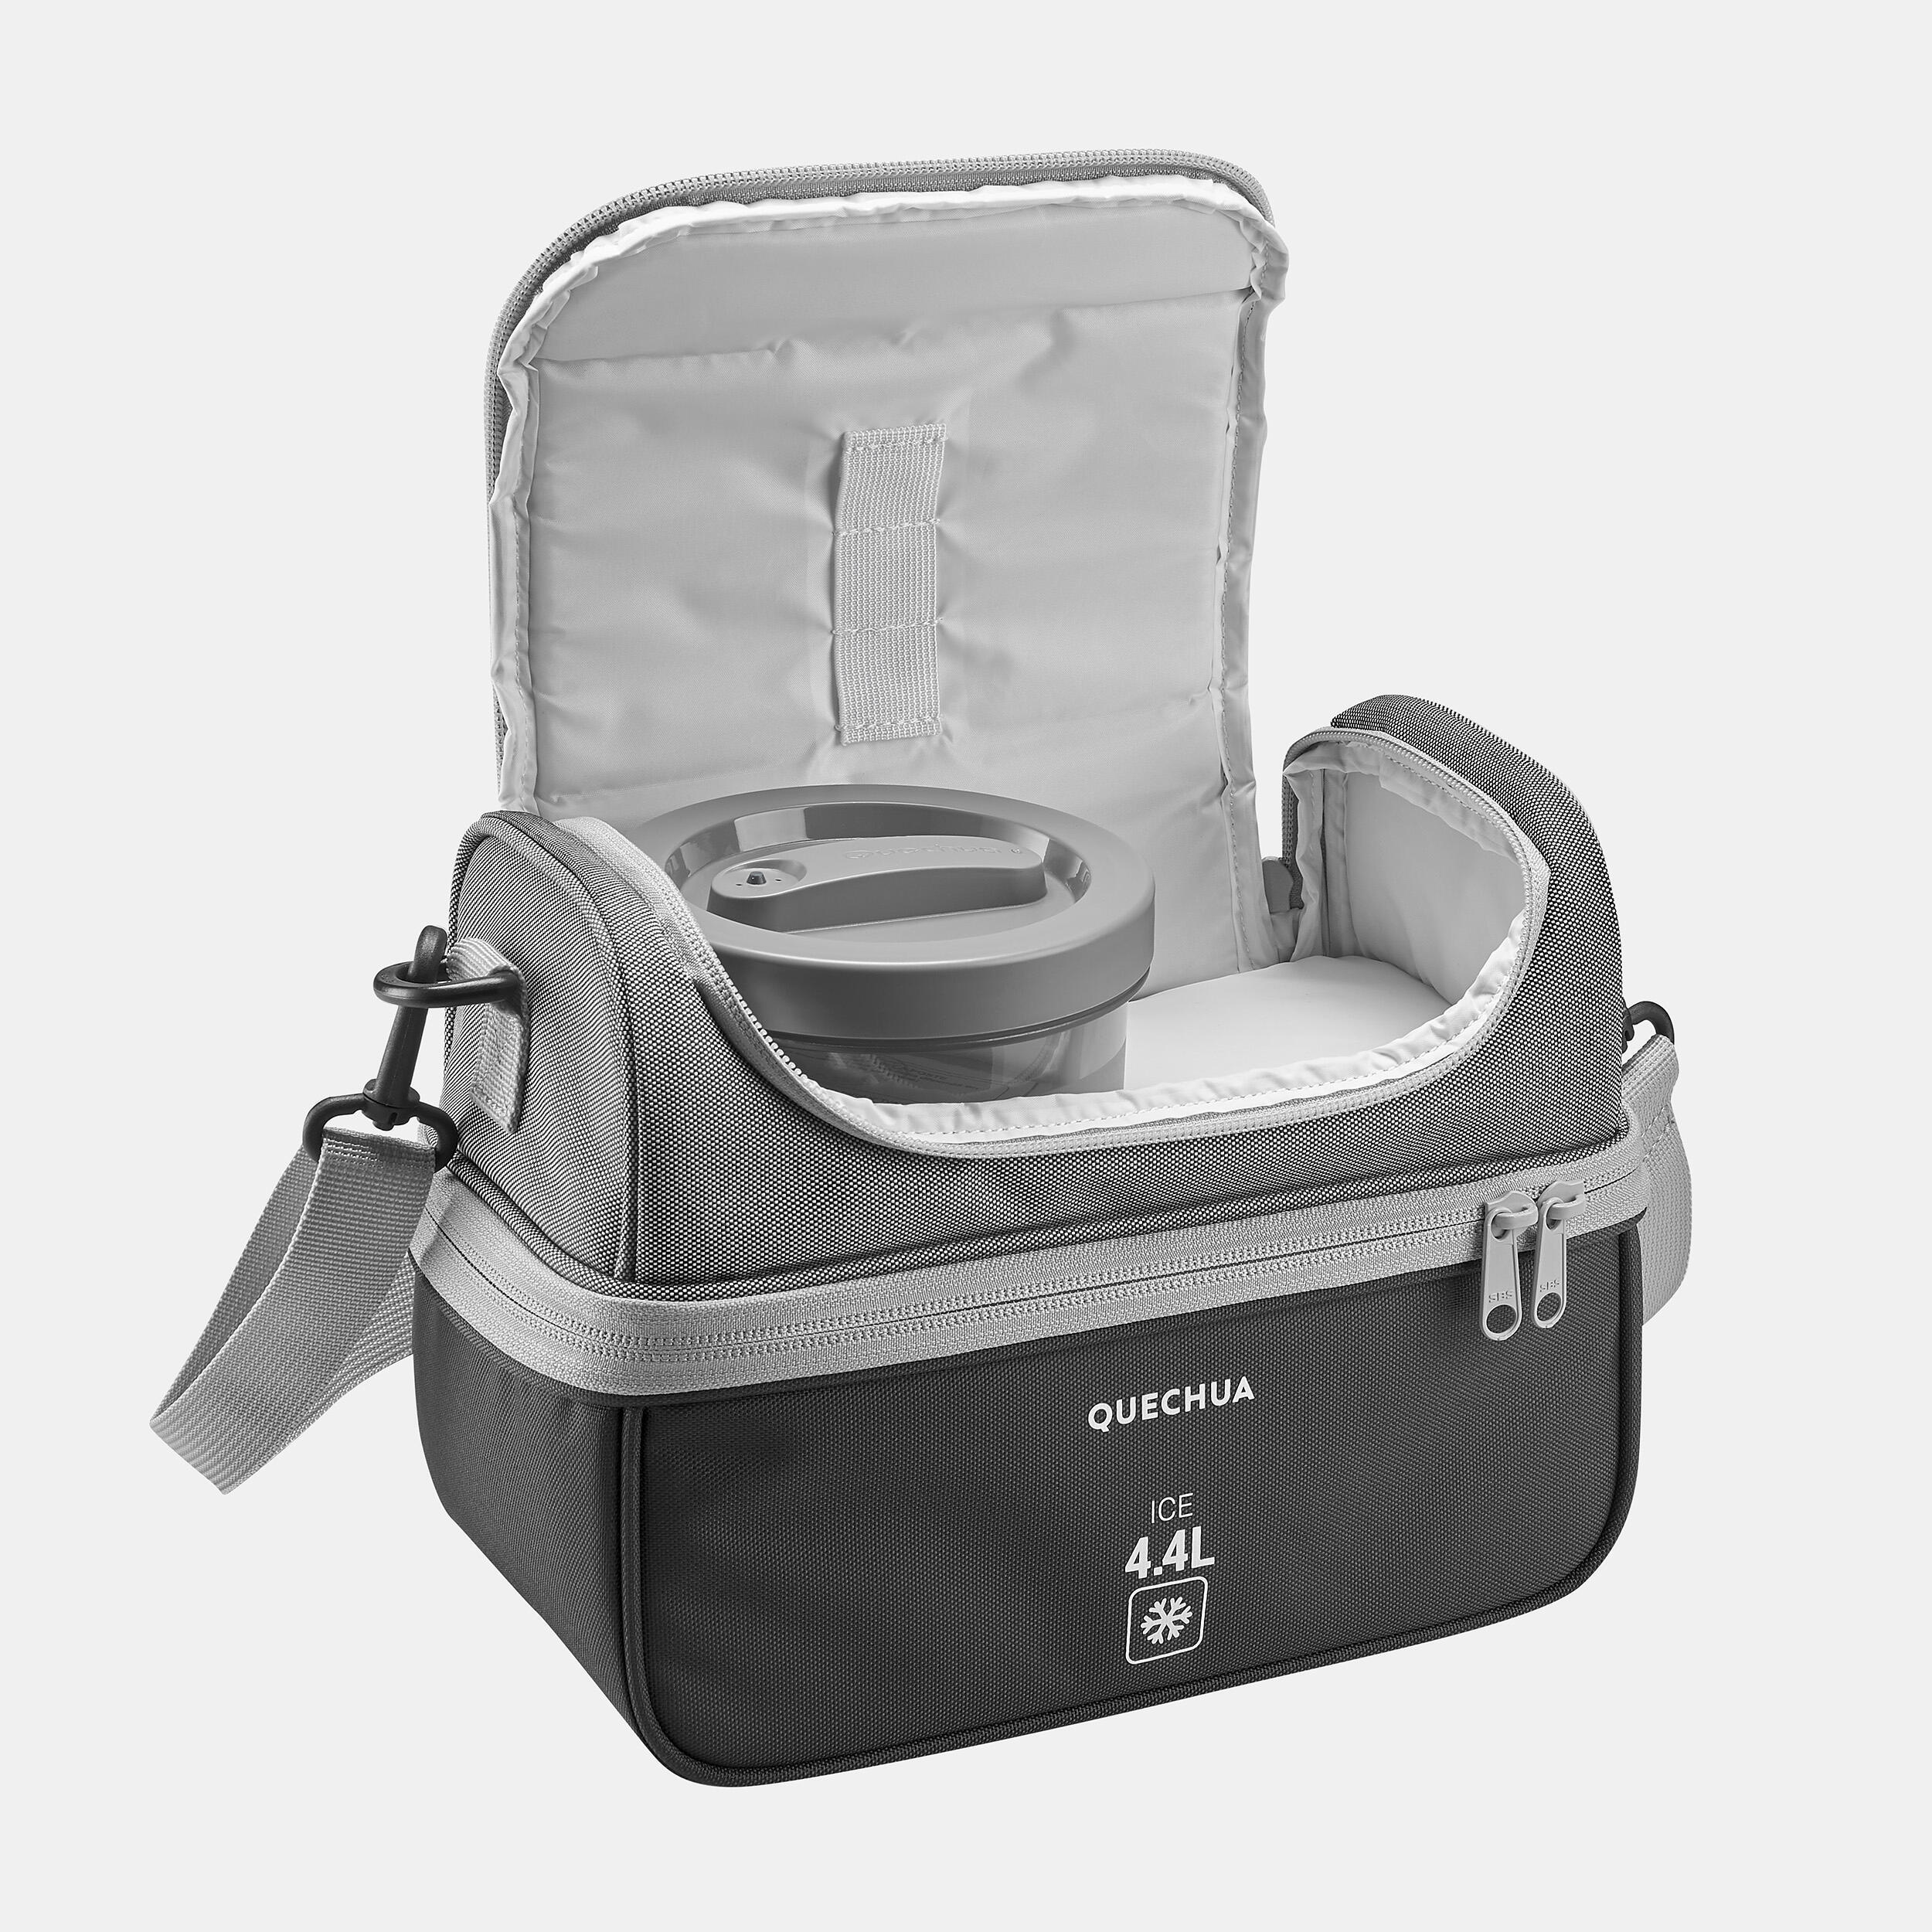 Insulated lunch box 100 - 4.4 Litres - 2 food storage boxes included 9/9